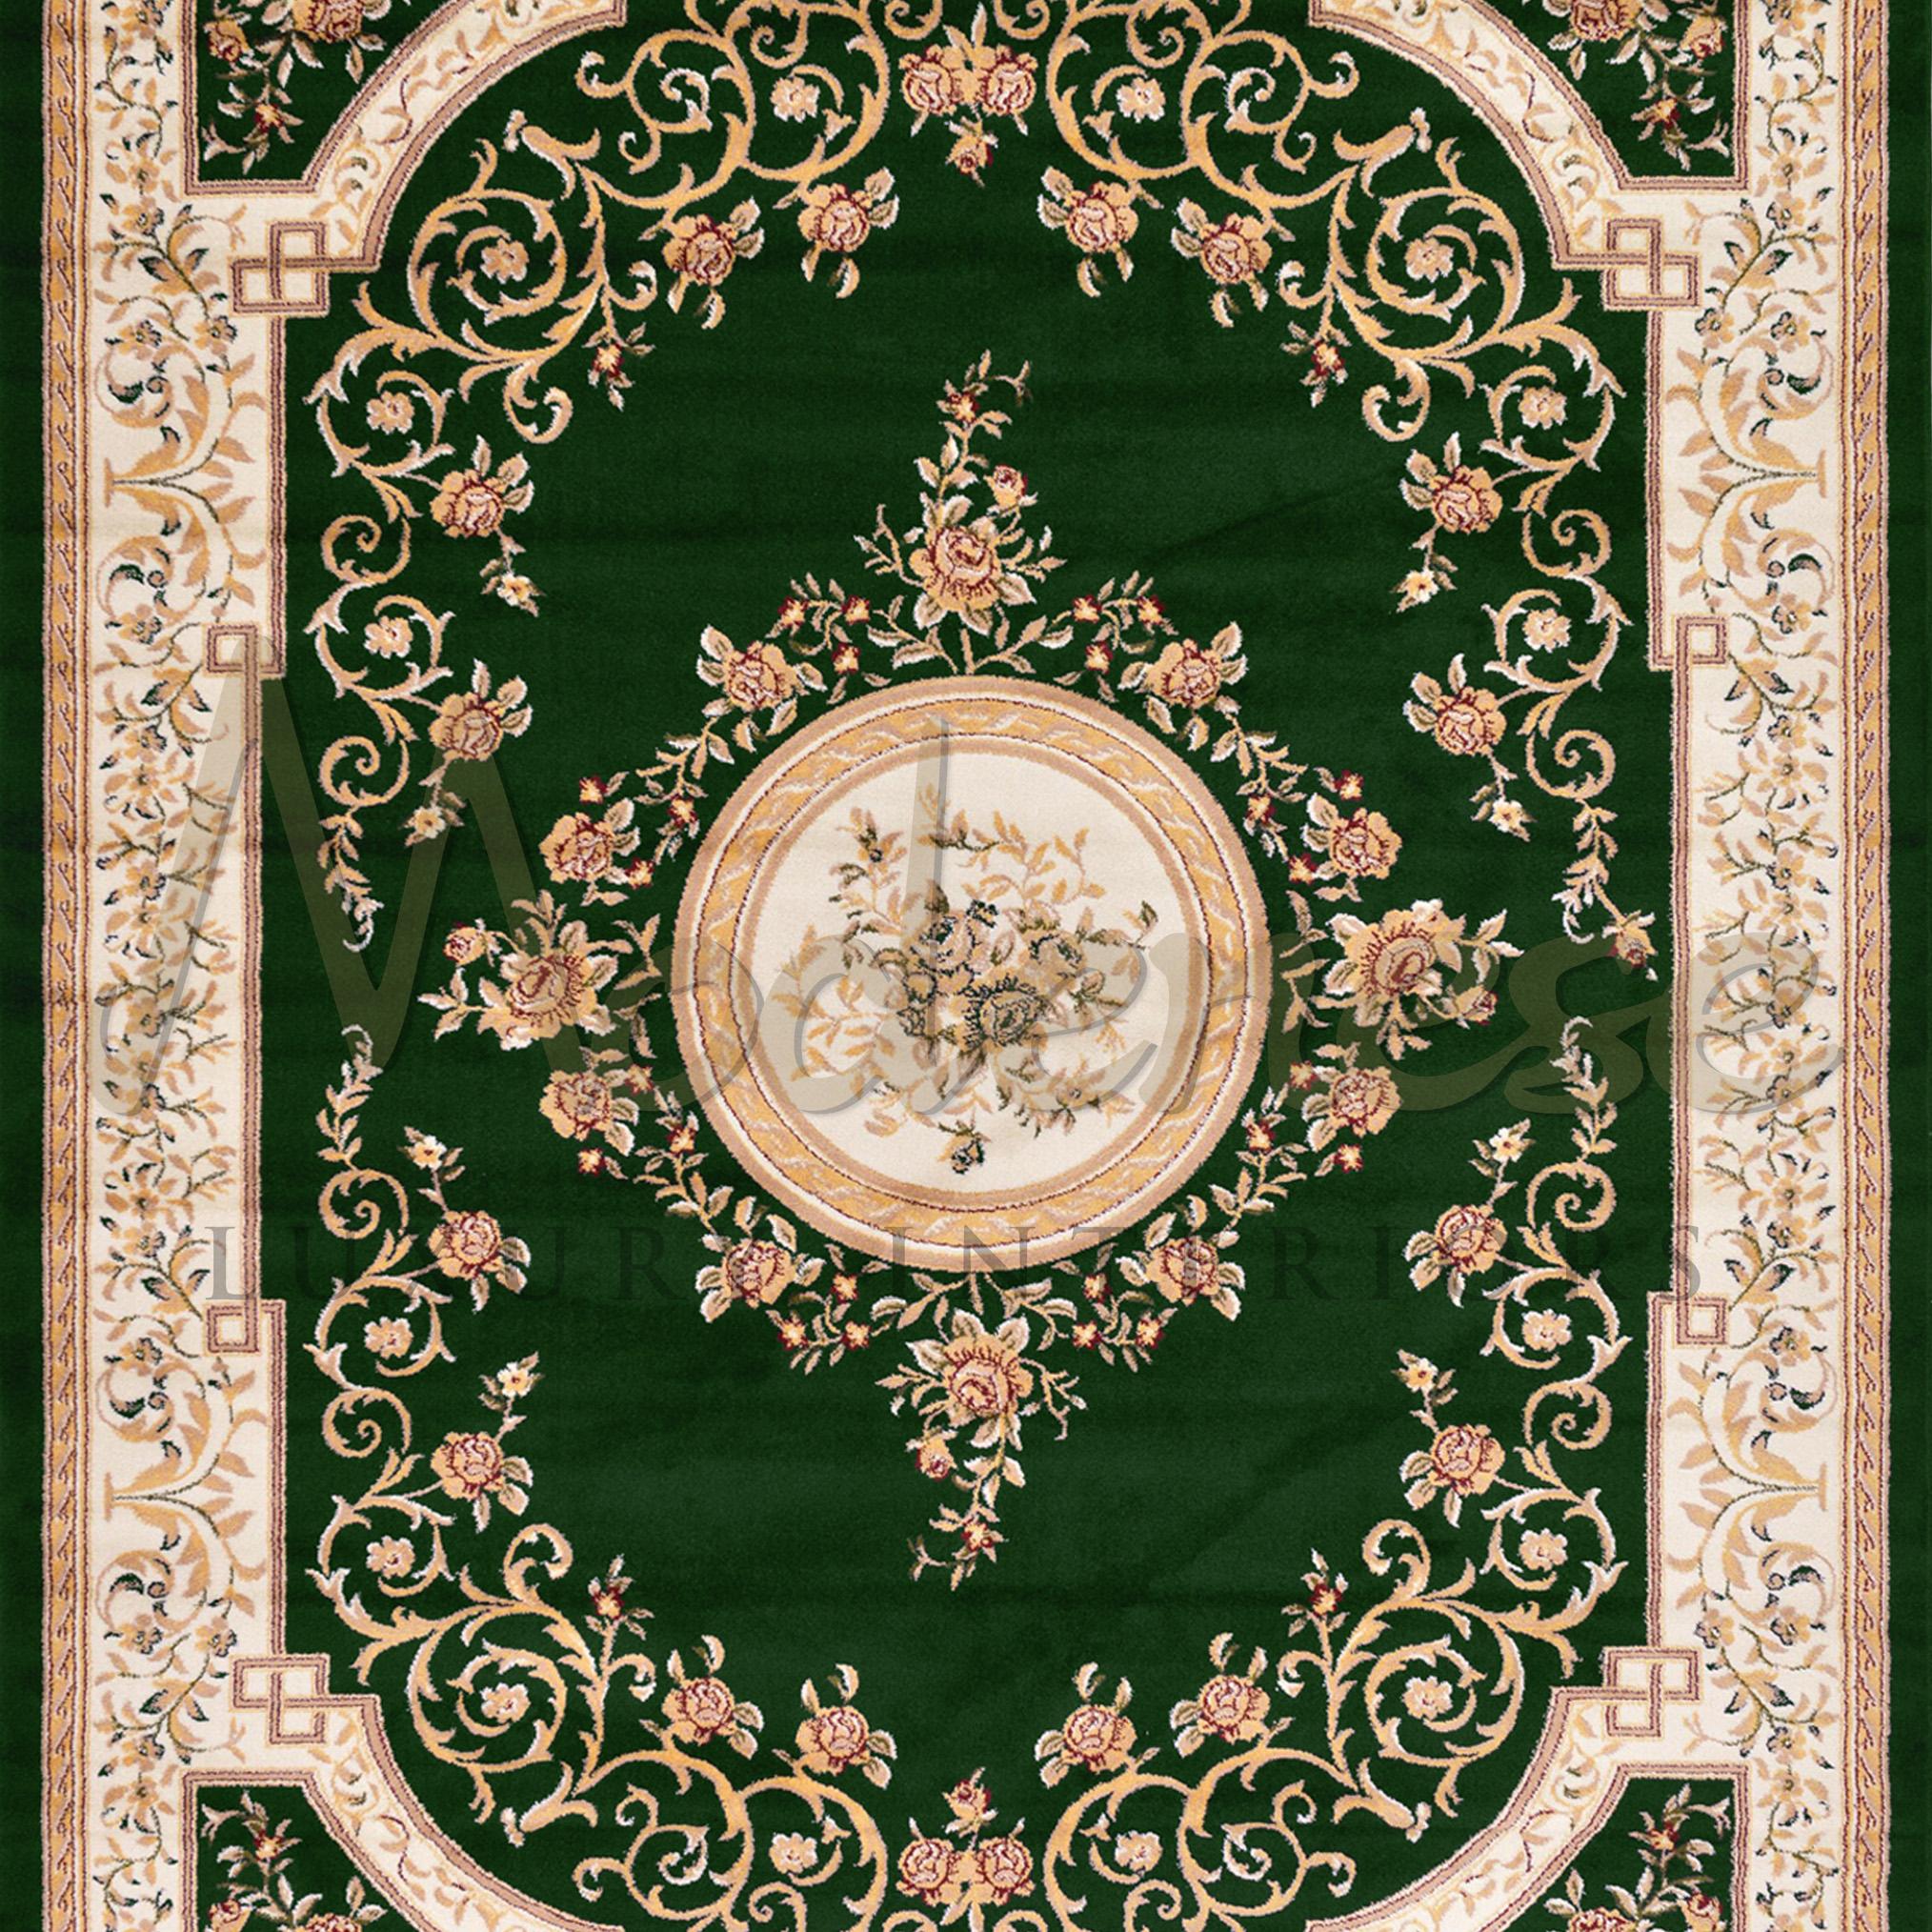 Pure bamboo silk rug with green background and white border stripes, flower decorations. Modenese Interiors artisans preciously handknotted this colorized vintage rug for a lavish classic villa interior project.

  